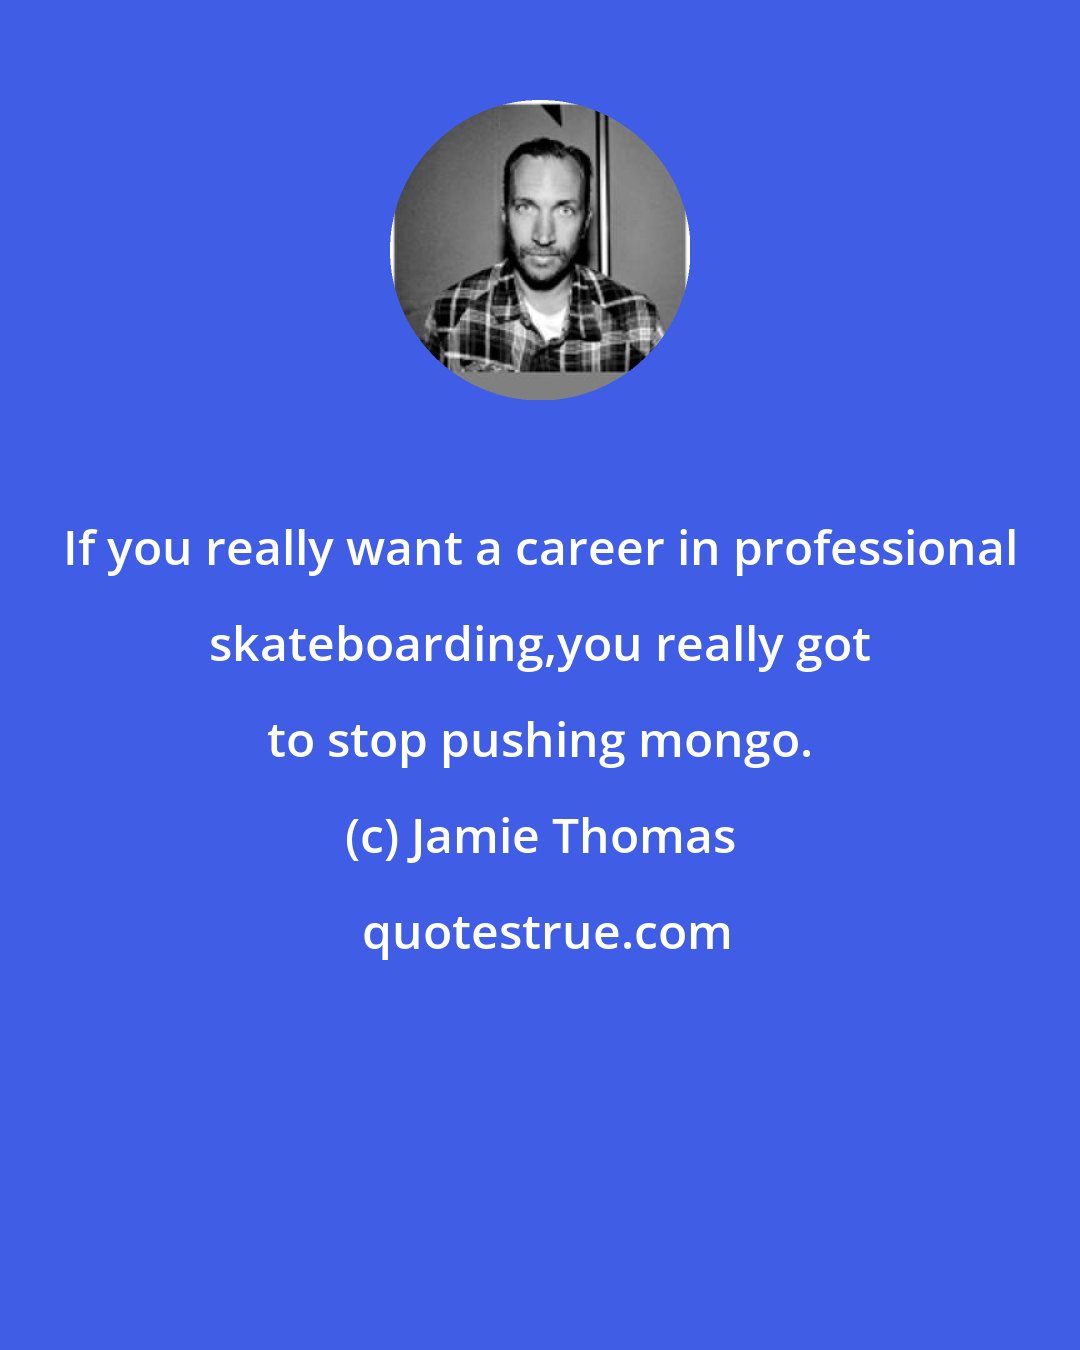 Jamie Thomas: If you really want a career in professional skateboarding,you really got to stop pushing mongo.